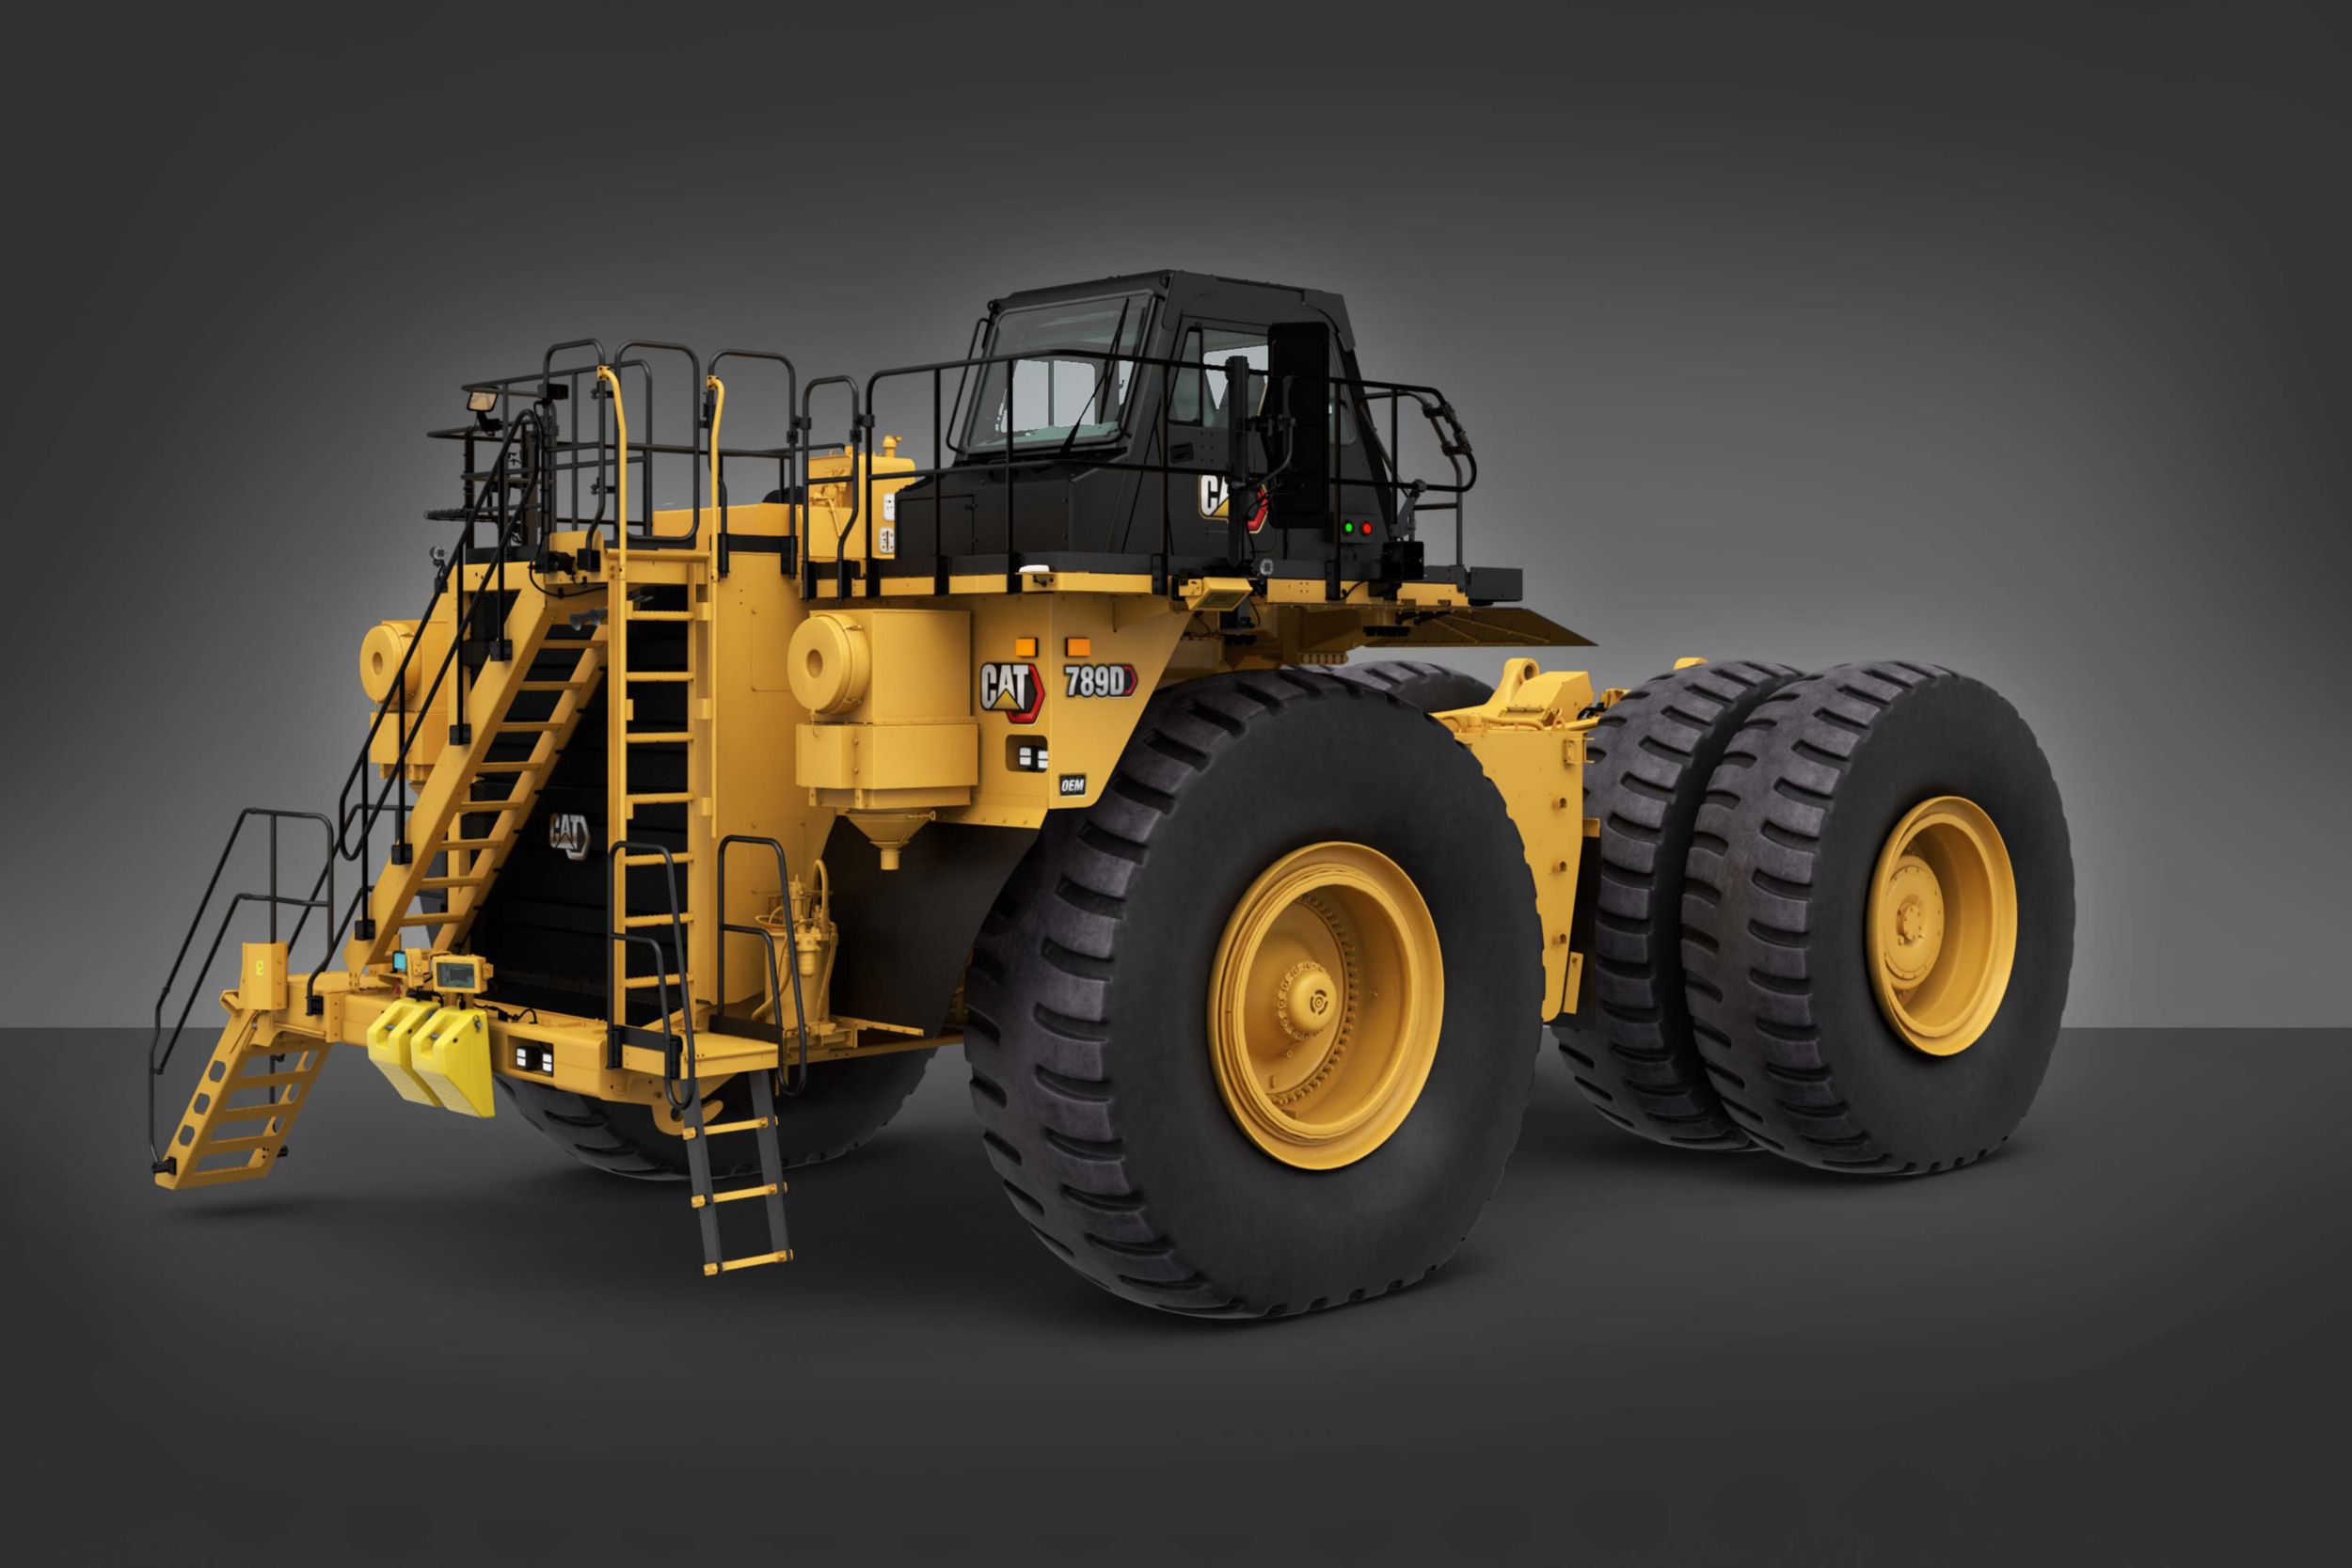 The 789D bare chassis comes equipped with a higher Tractor ROPS certification ratings needed for specialty machines including water trucks, tow trucks, and fuel and lube trucks.